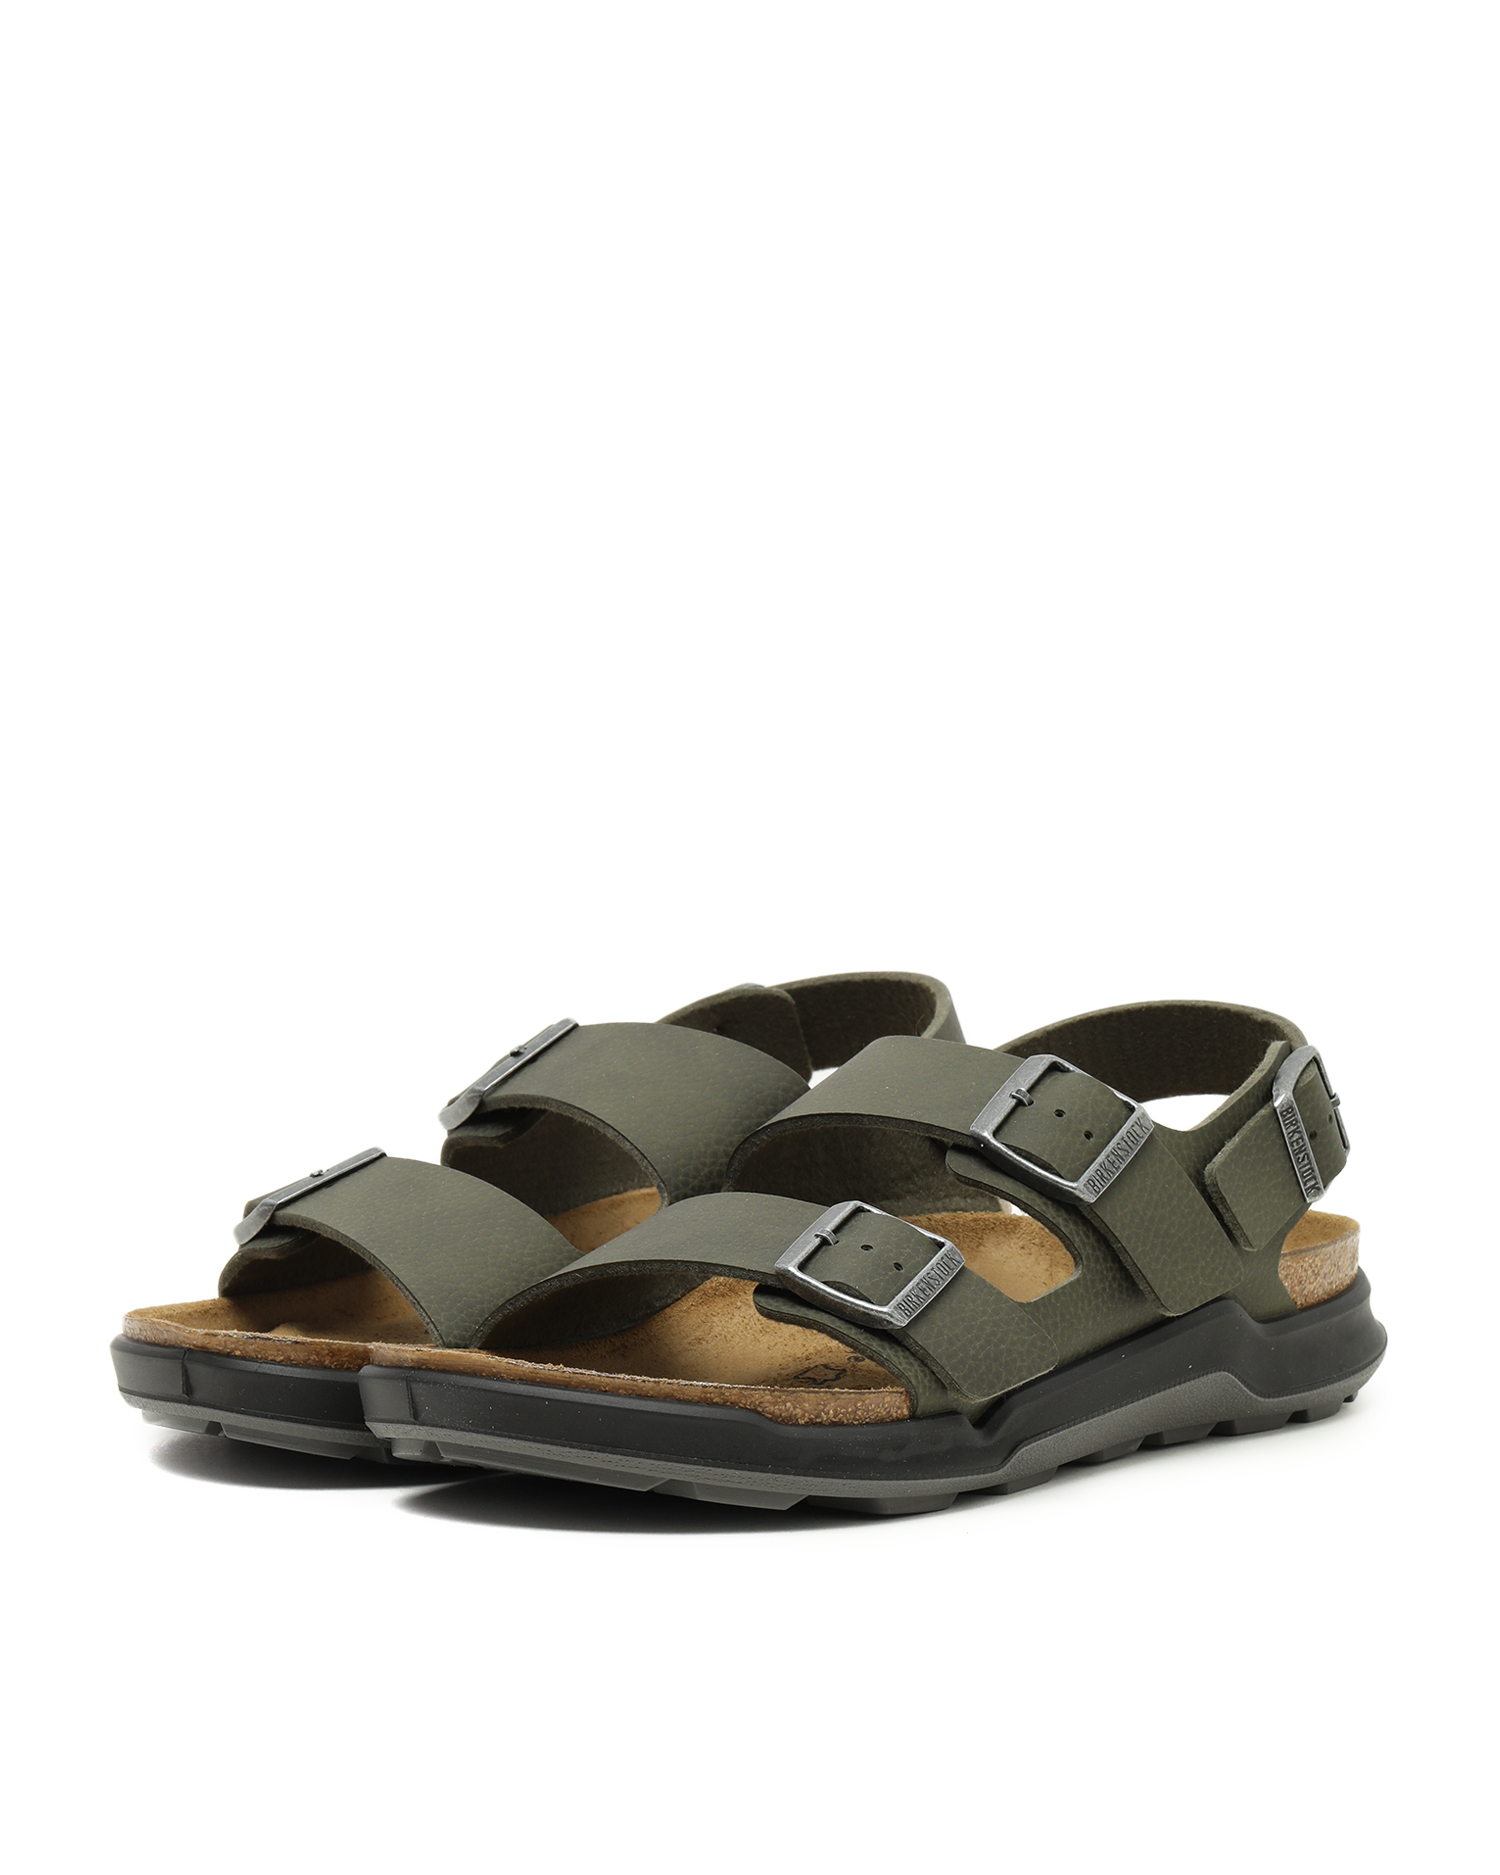 places that sell birkenstock sandals